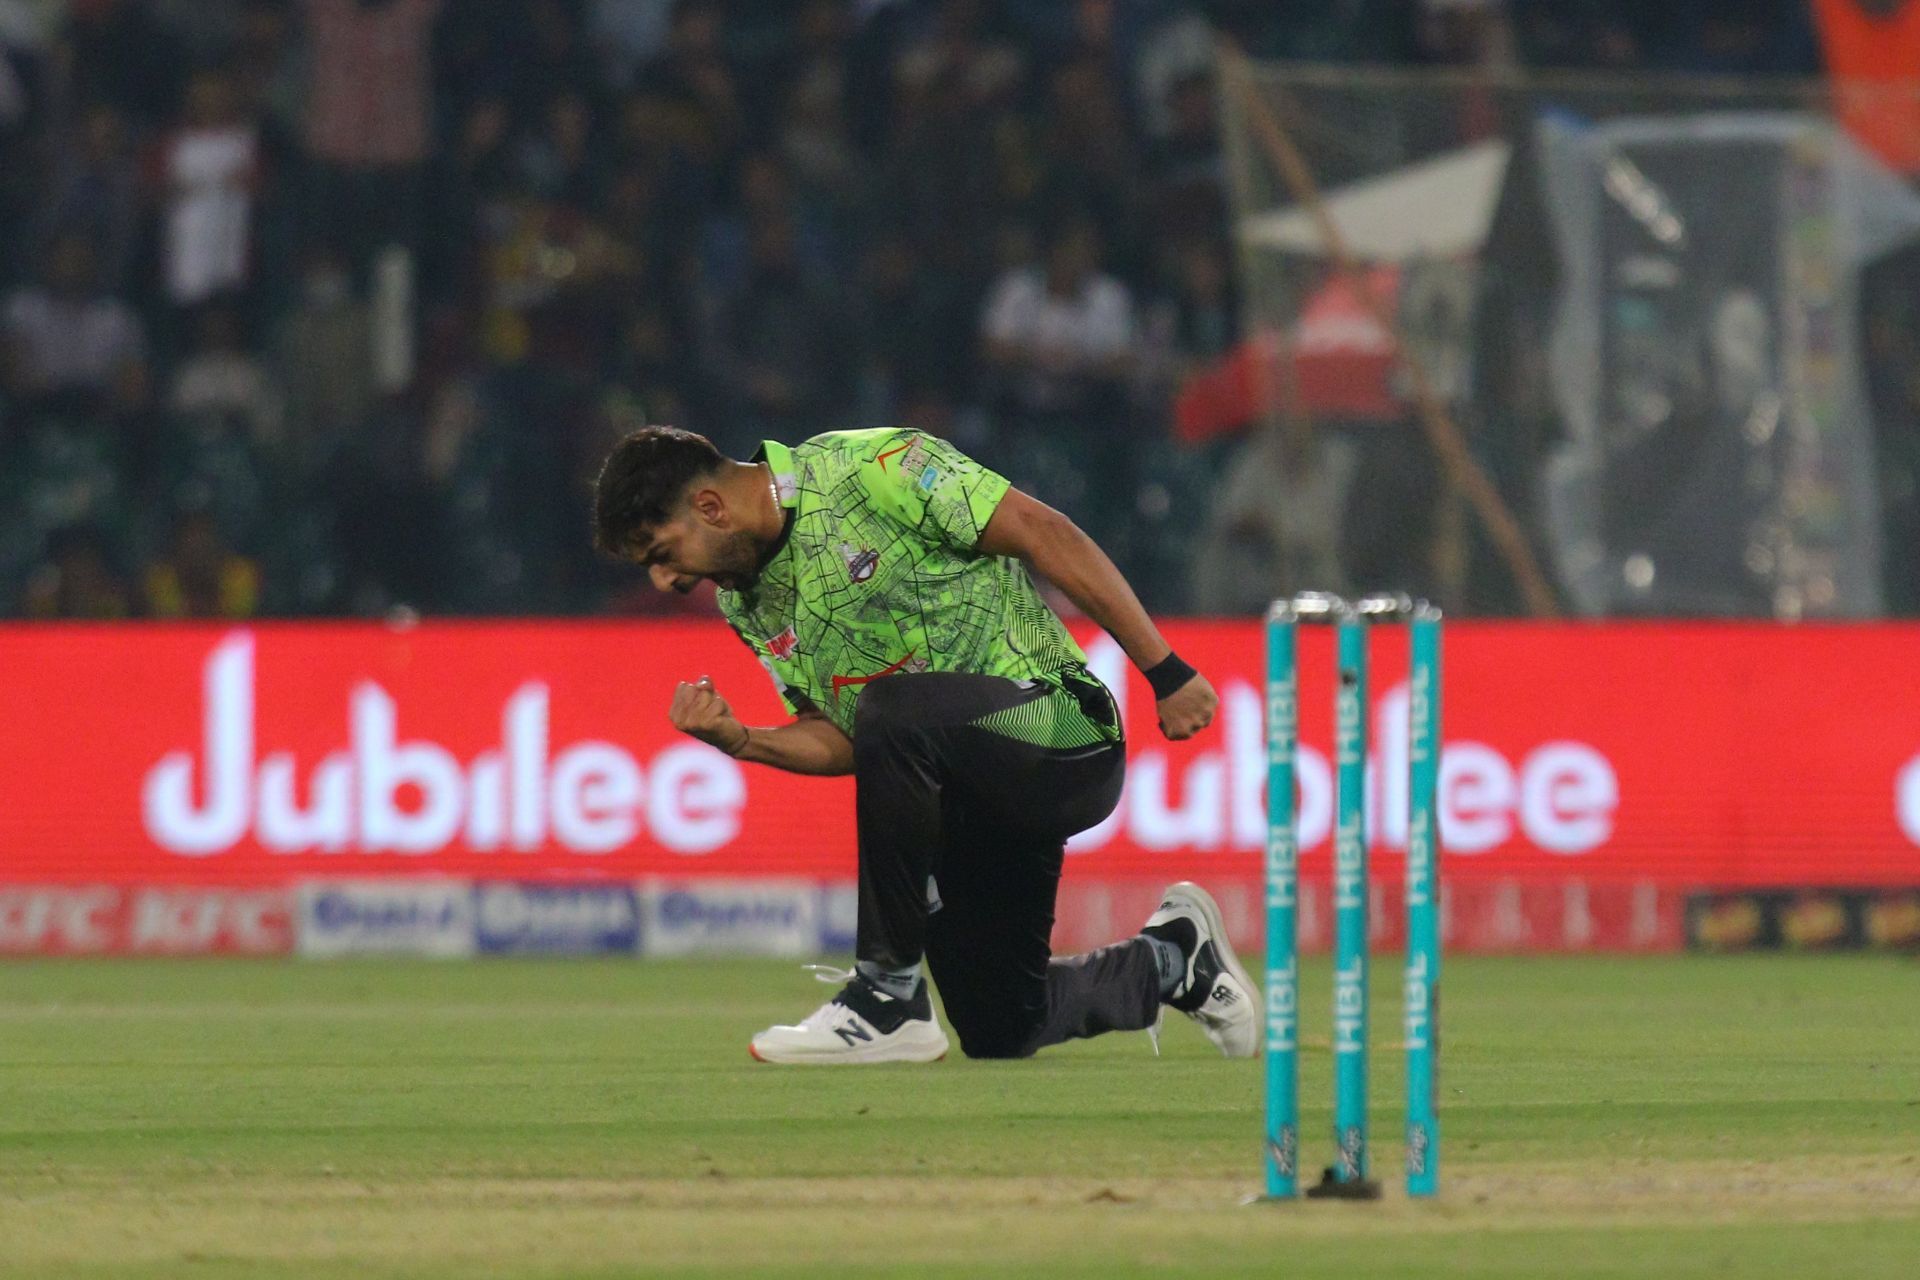 Haris Rauf will be the player to watch out for (Image: Lahore Qalandars/Twitter)